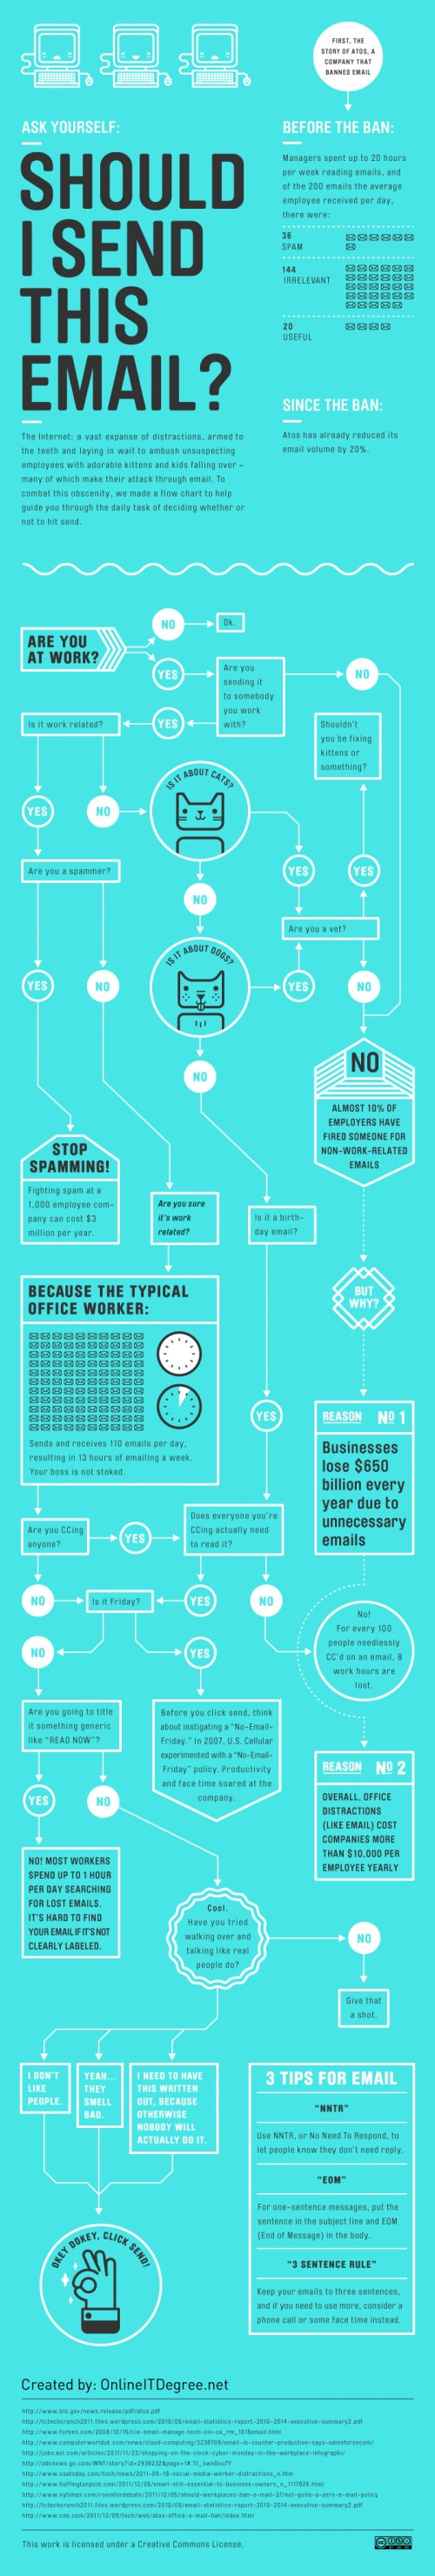 Infographic courtesy of Visually. http://visual.ly/